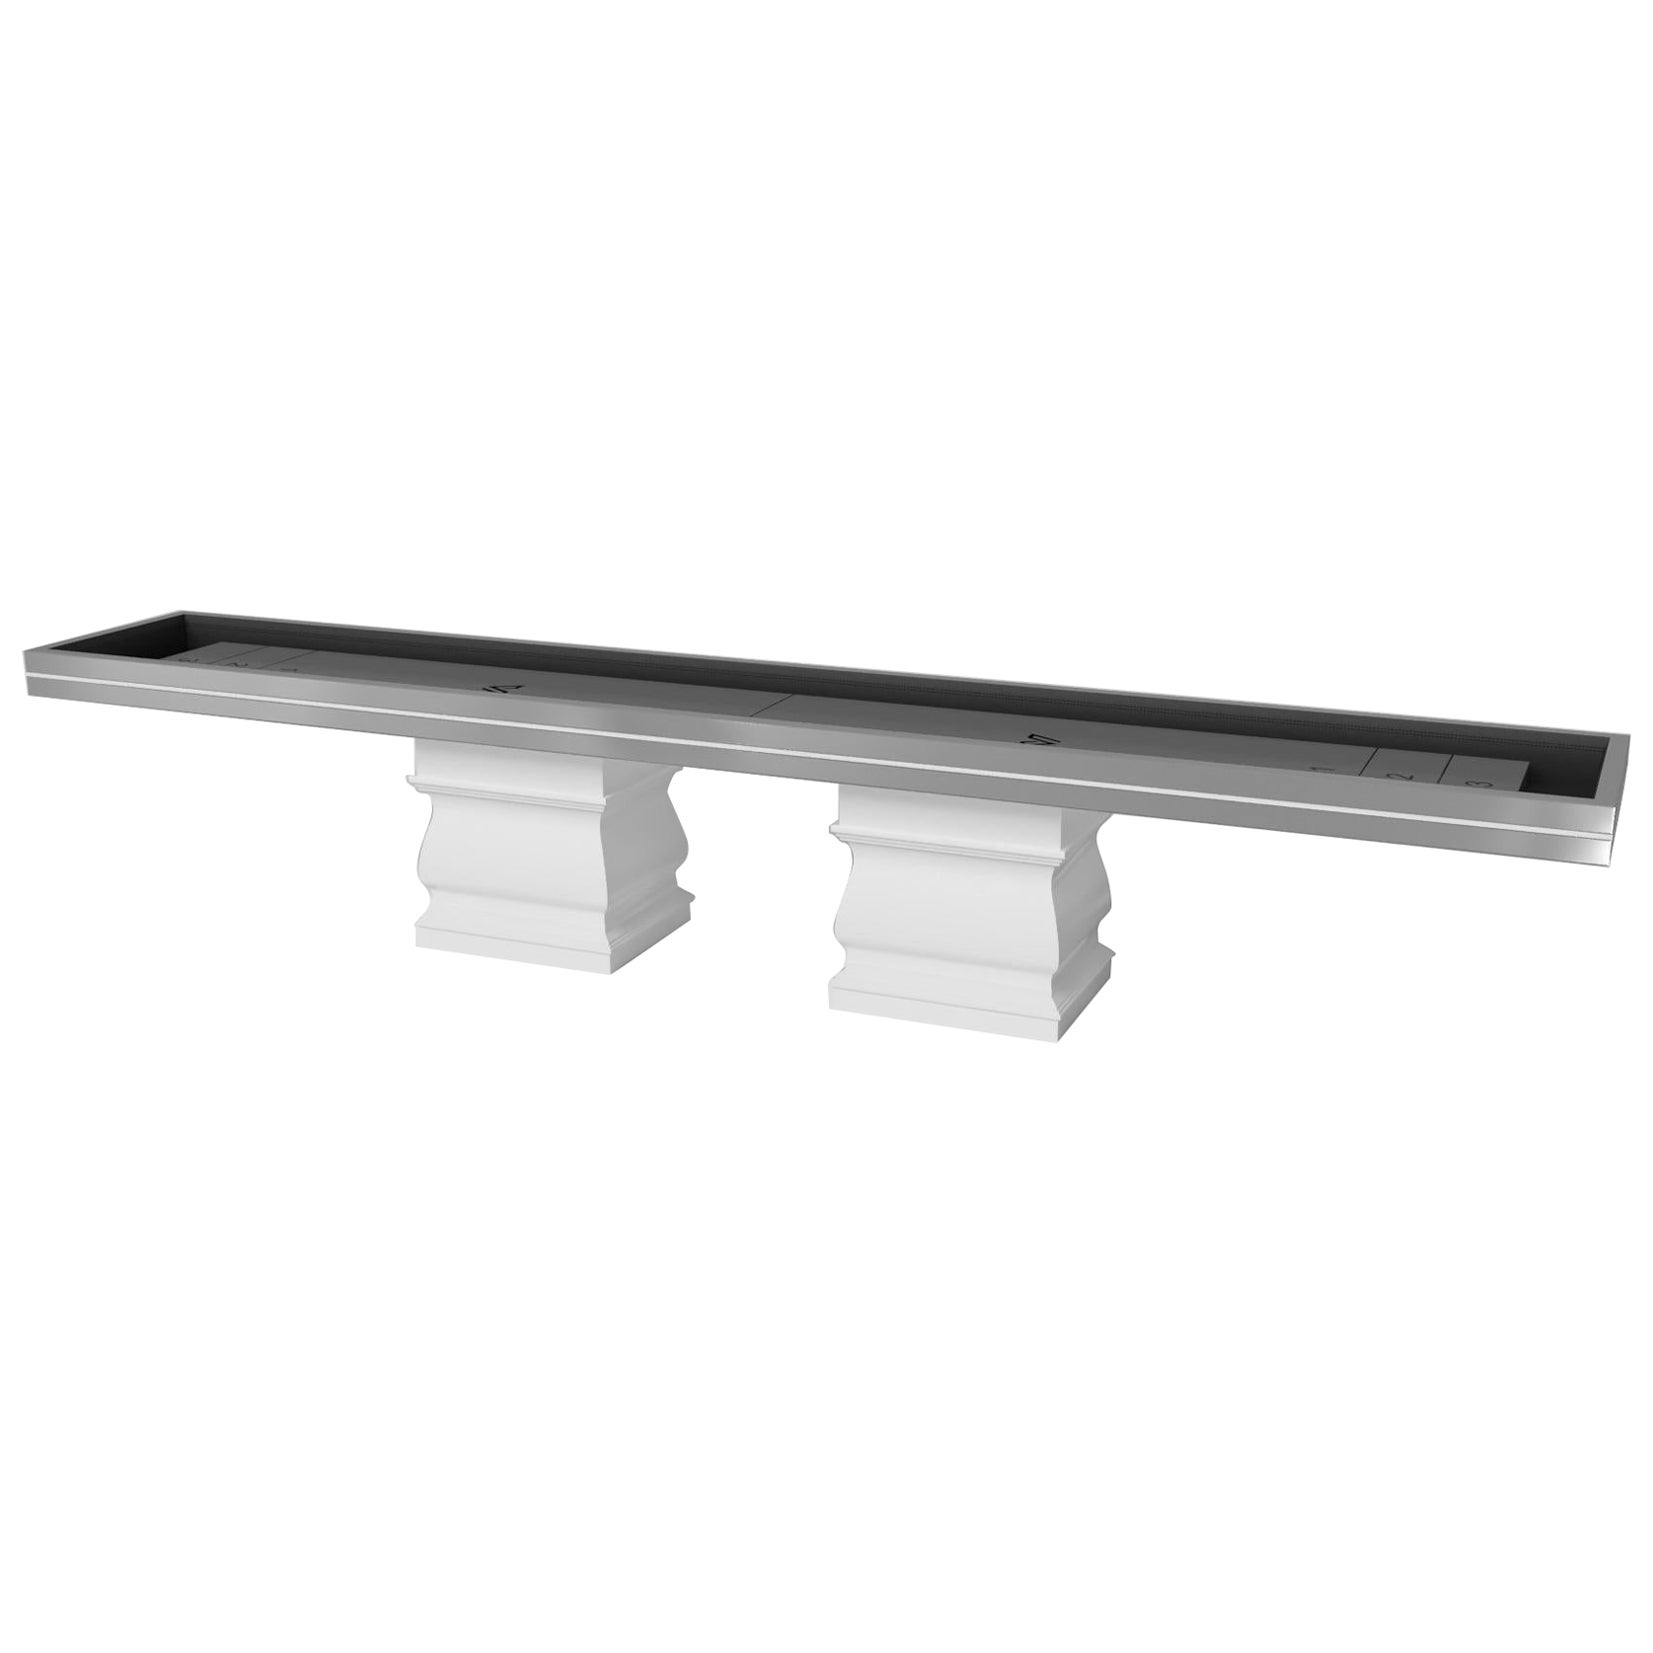 Elevate Customs Baluster Shuffleboard / Stainless Steel Sheet Metal in 18' - USA For Sale